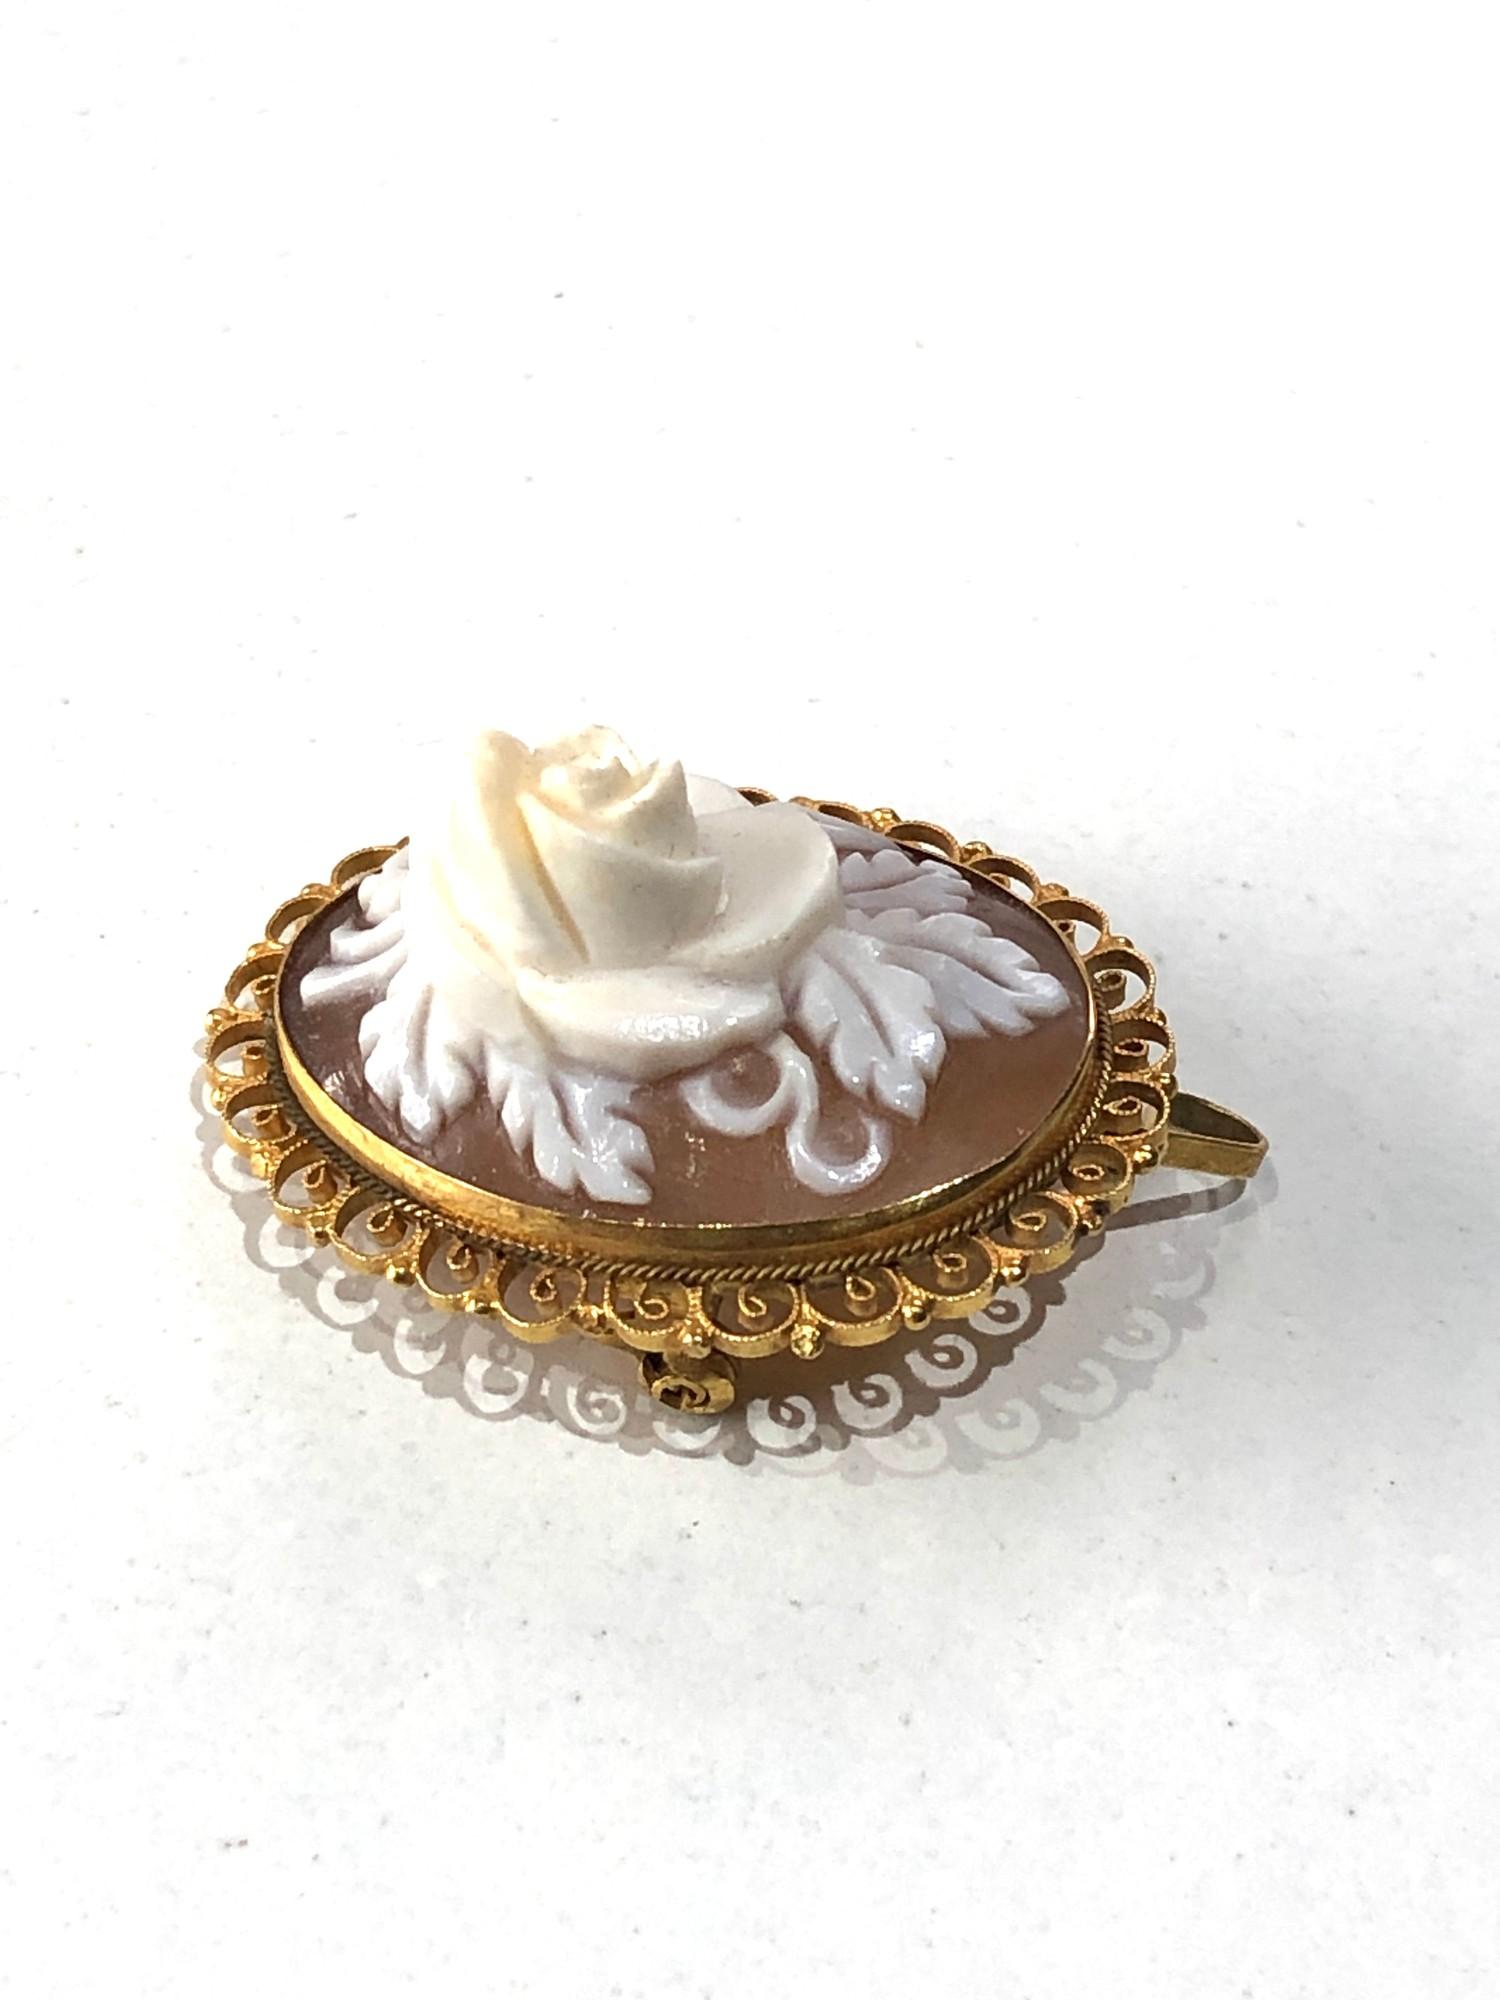 Antique 15ct framed cameo pendant brooch measures approx 3cm by 2.5cm weight 4.8g - Image 3 of 4